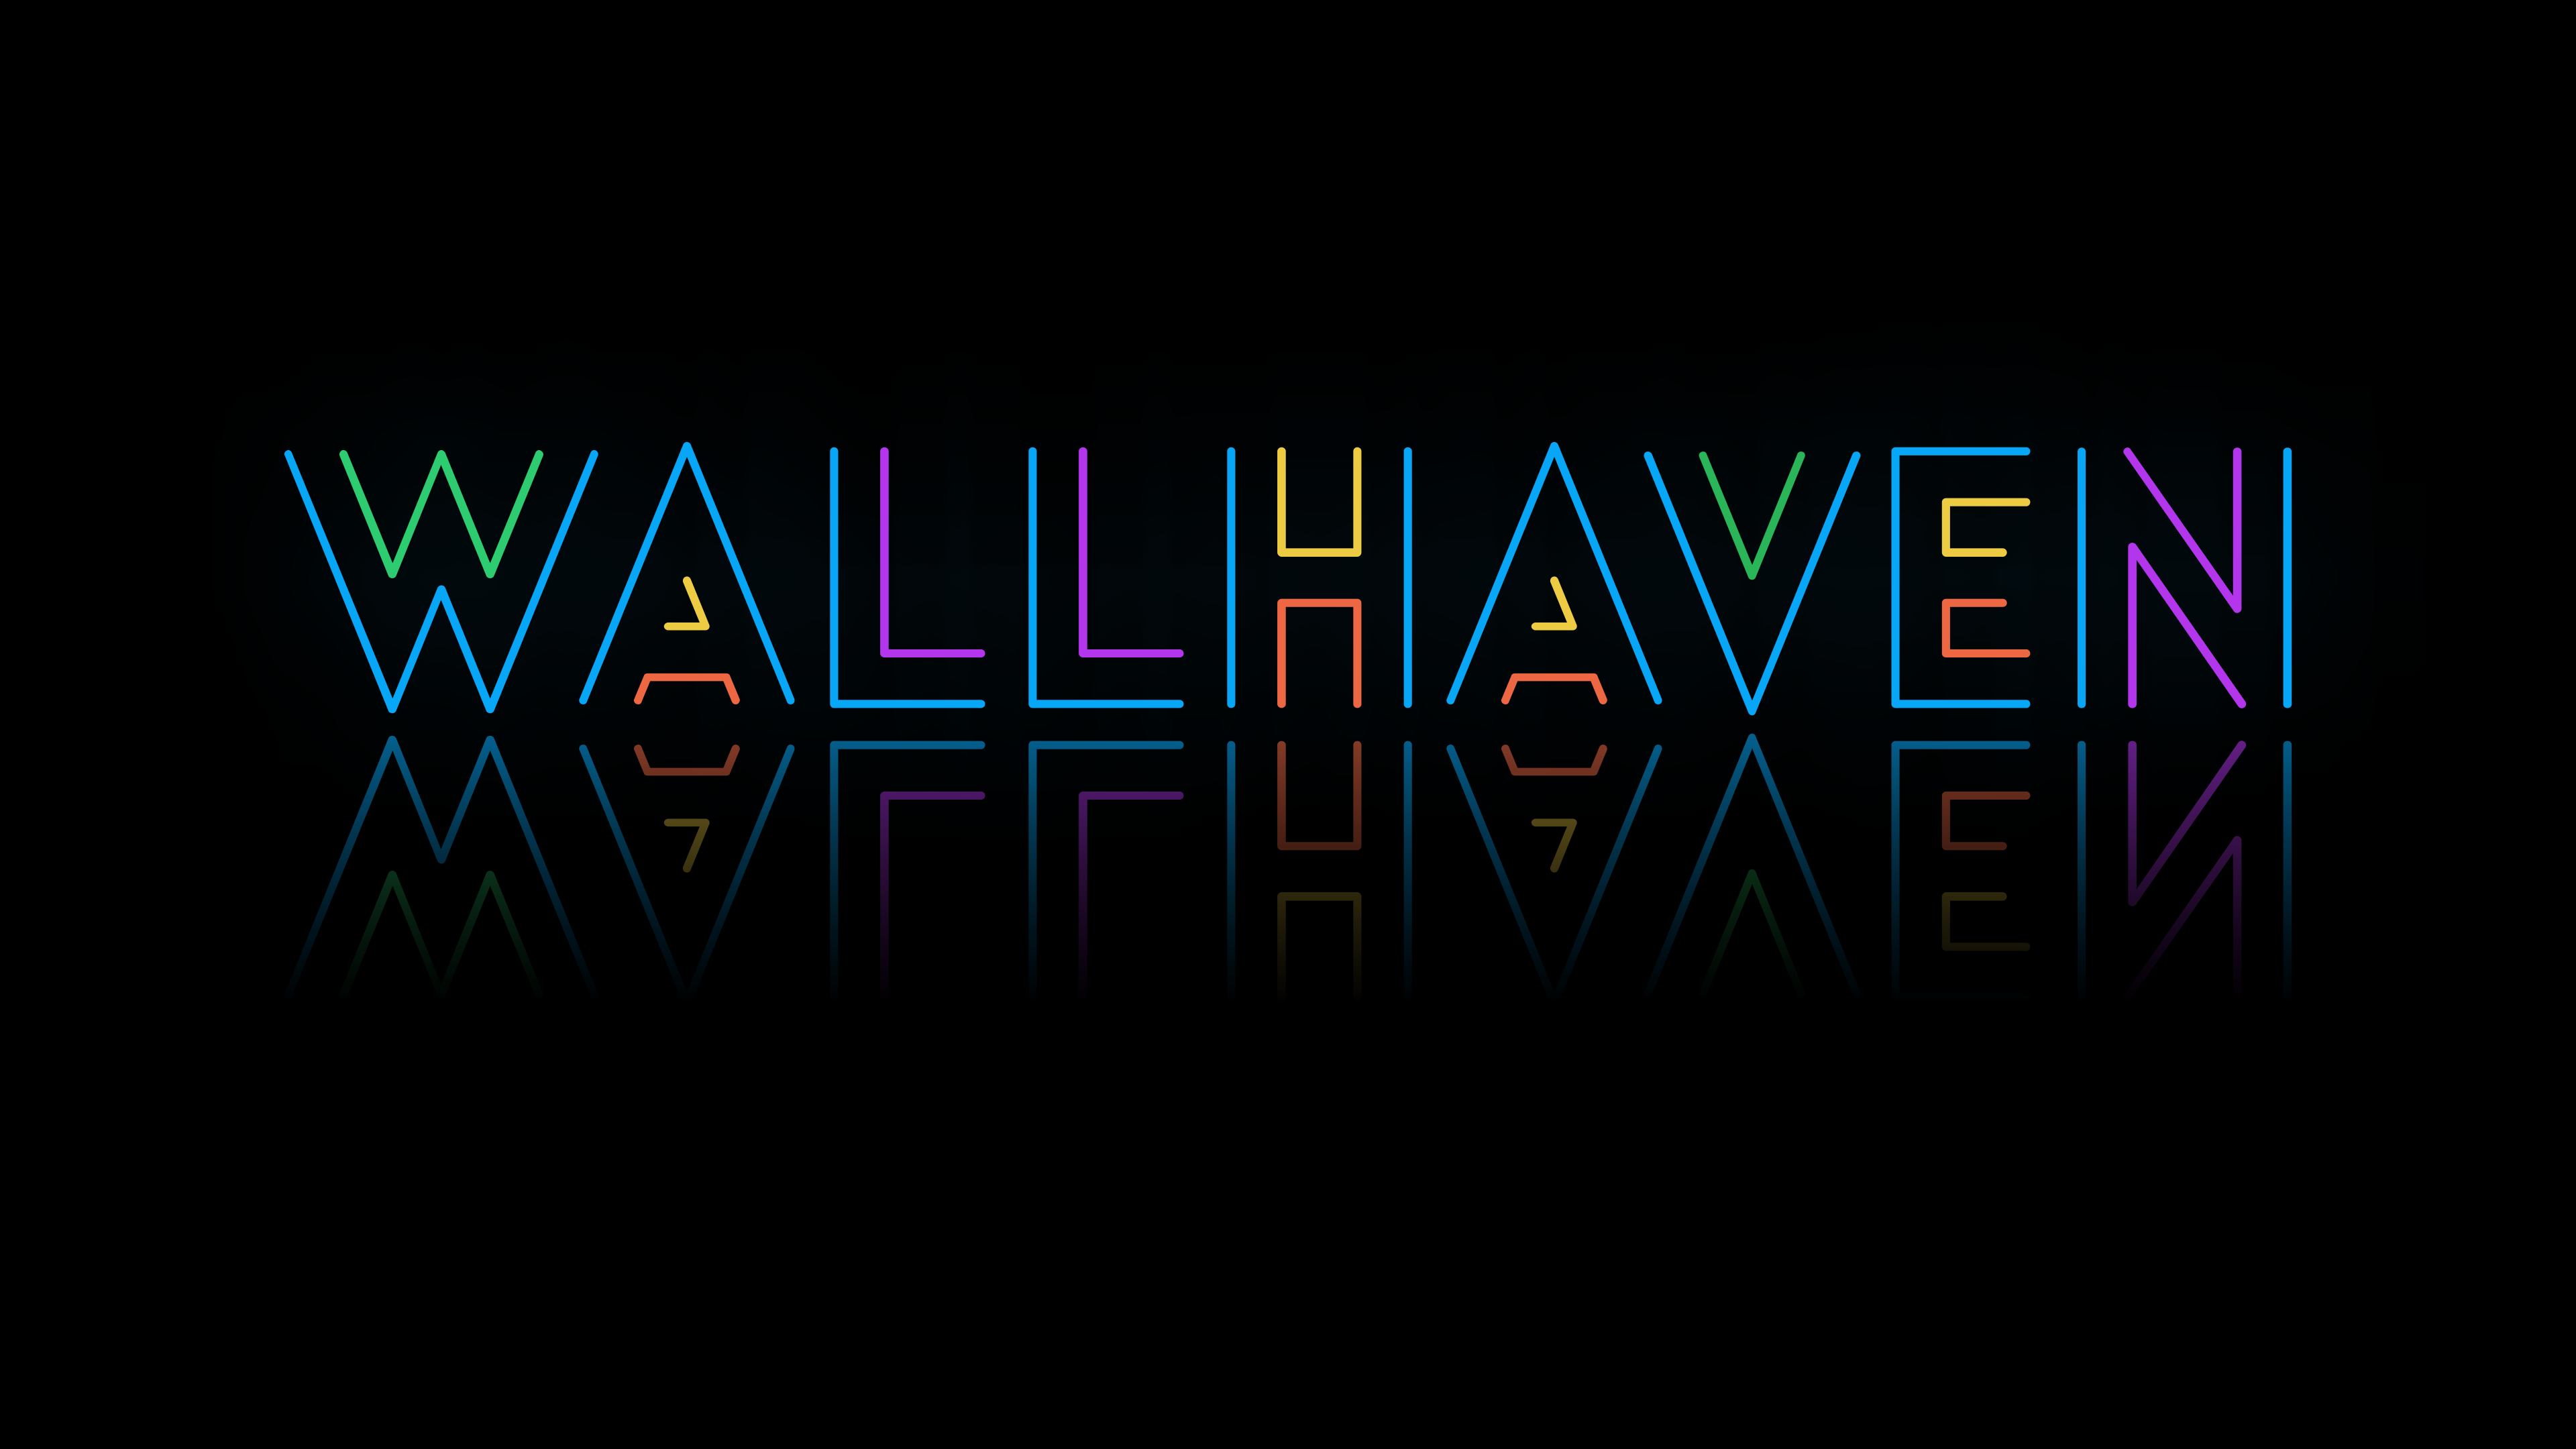 wallhaven image